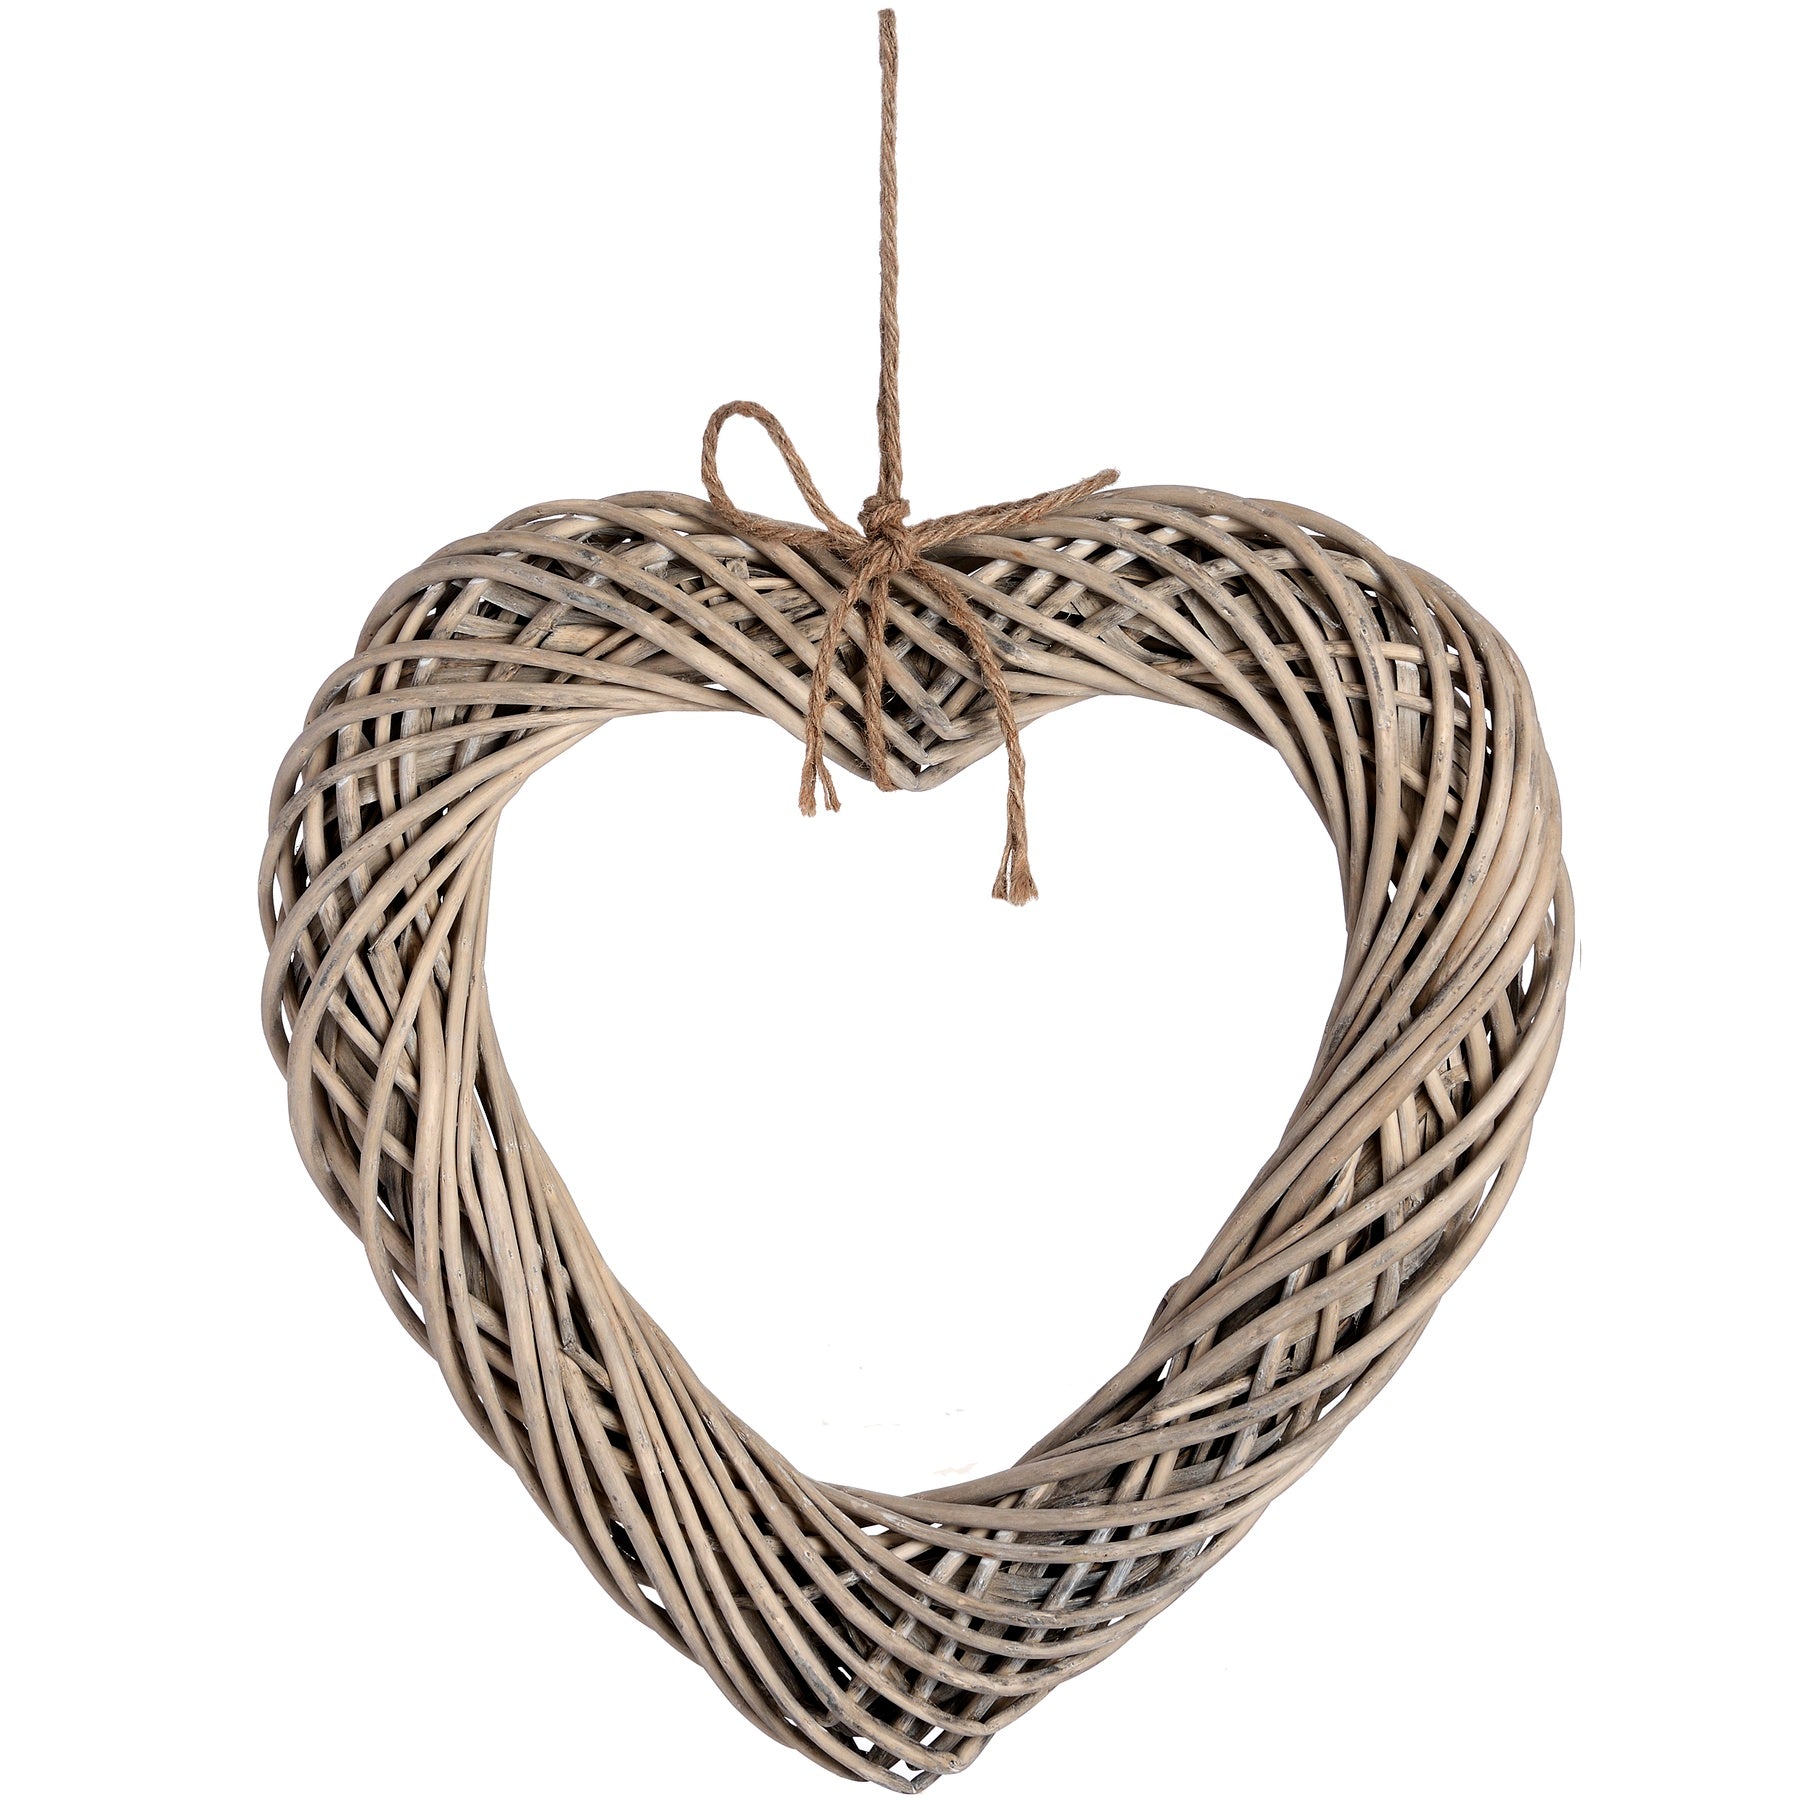 View Brown Large Wicker Hanging Heart with Rope Detail information